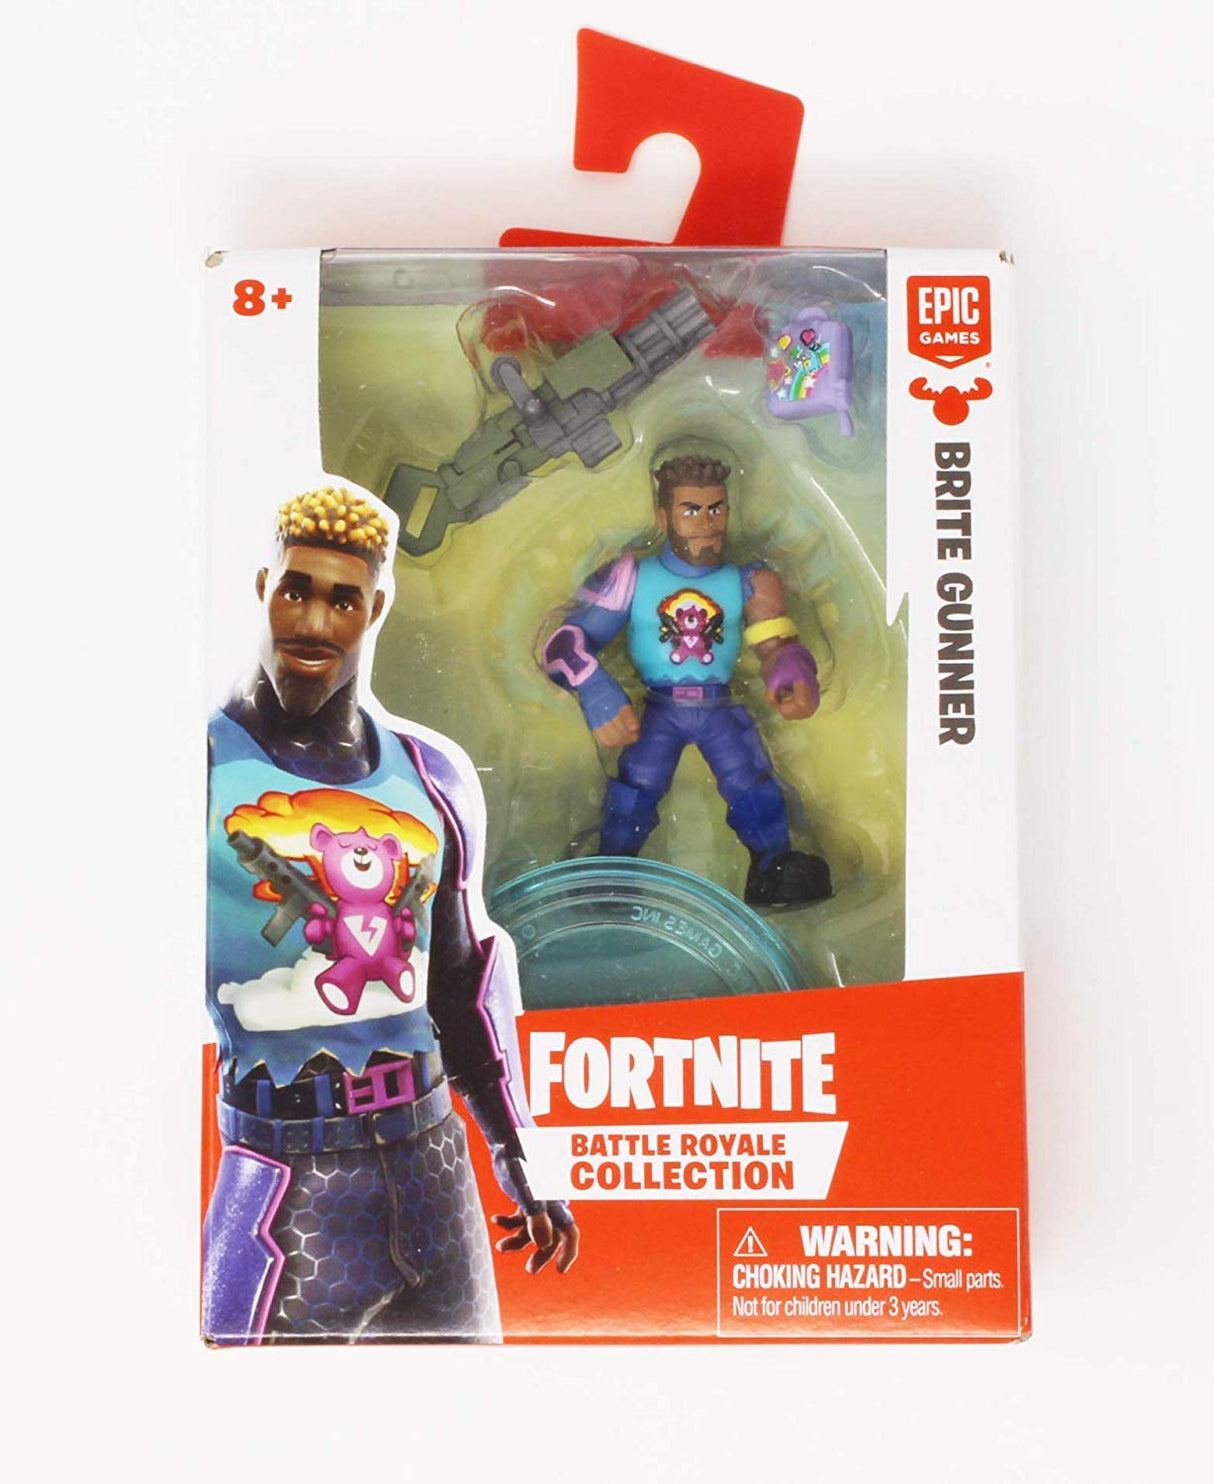 Fortnite Battle Royale Collection Spike & Strong Guard Action